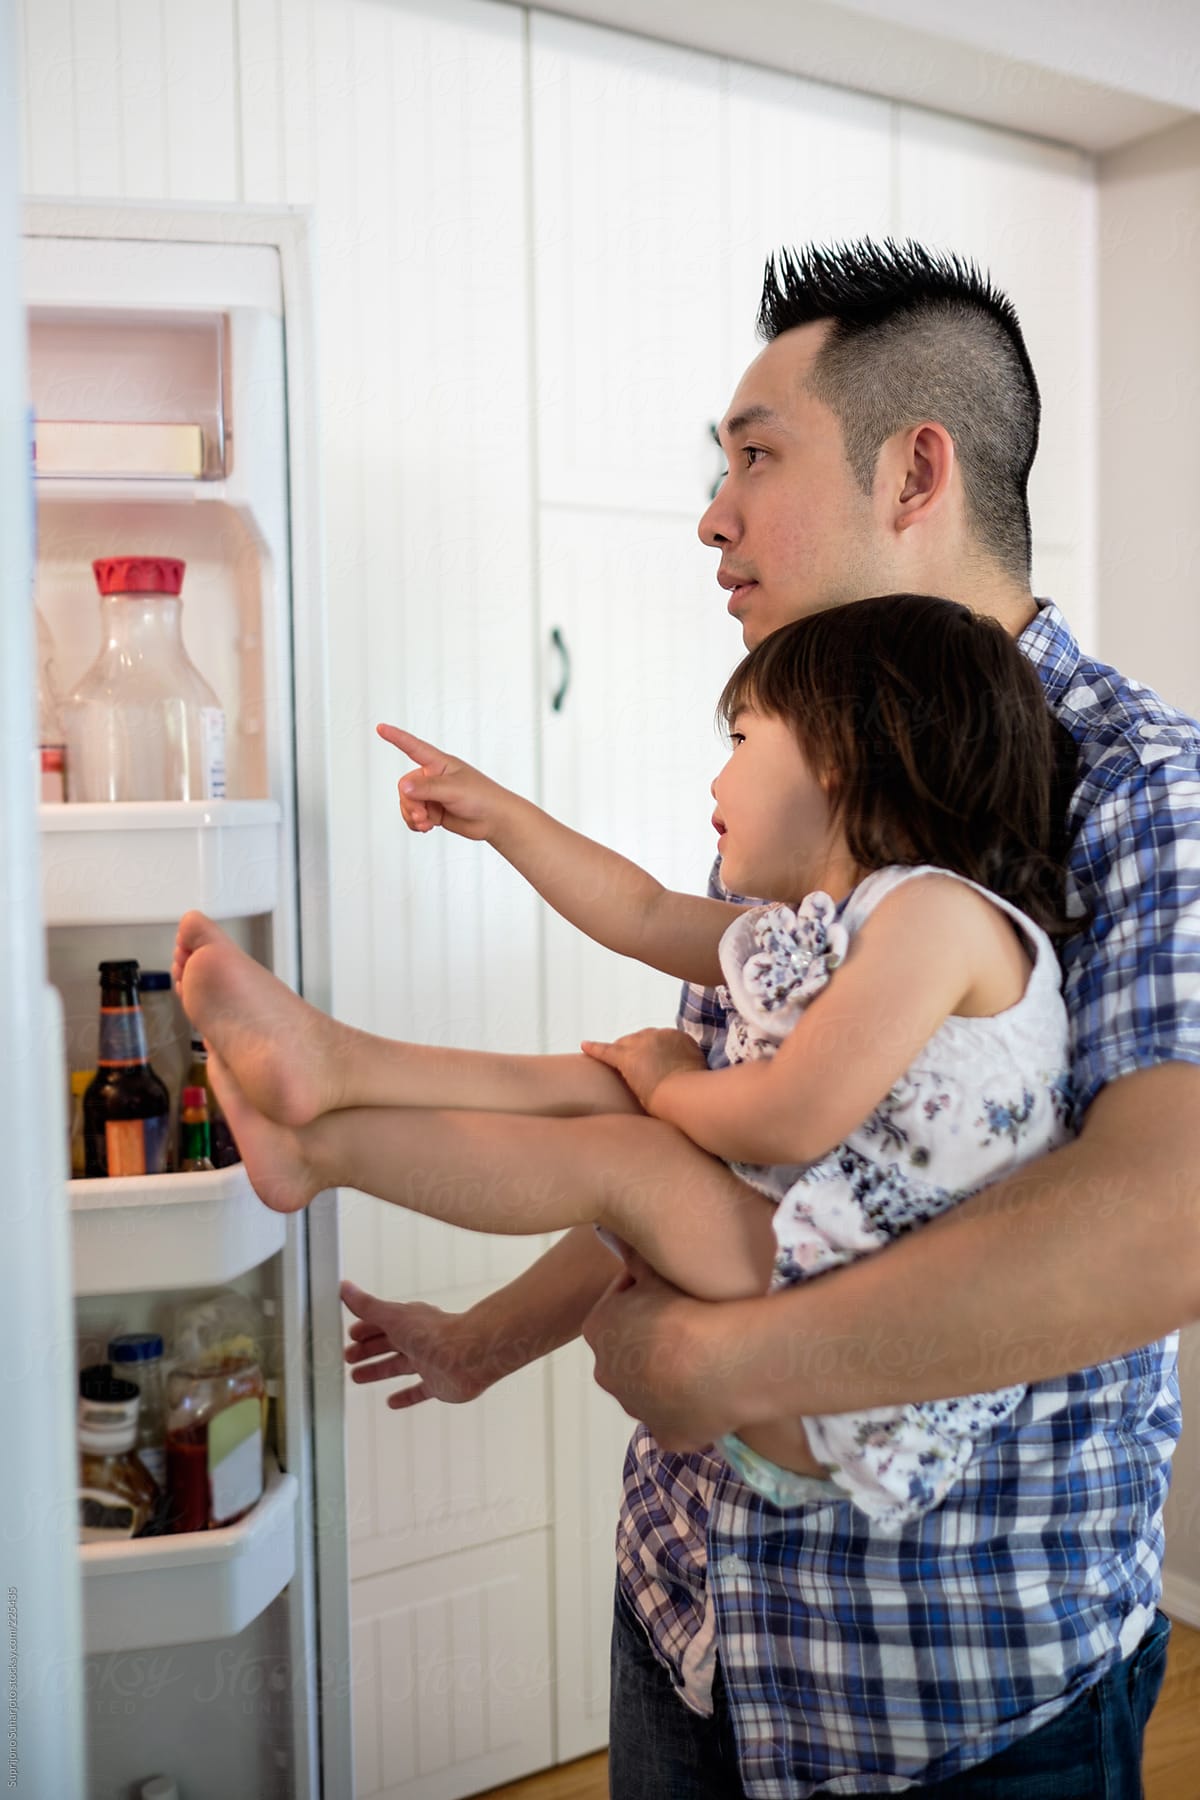 Little Asian girl looking into a refrigerator with her dad in the kitchen